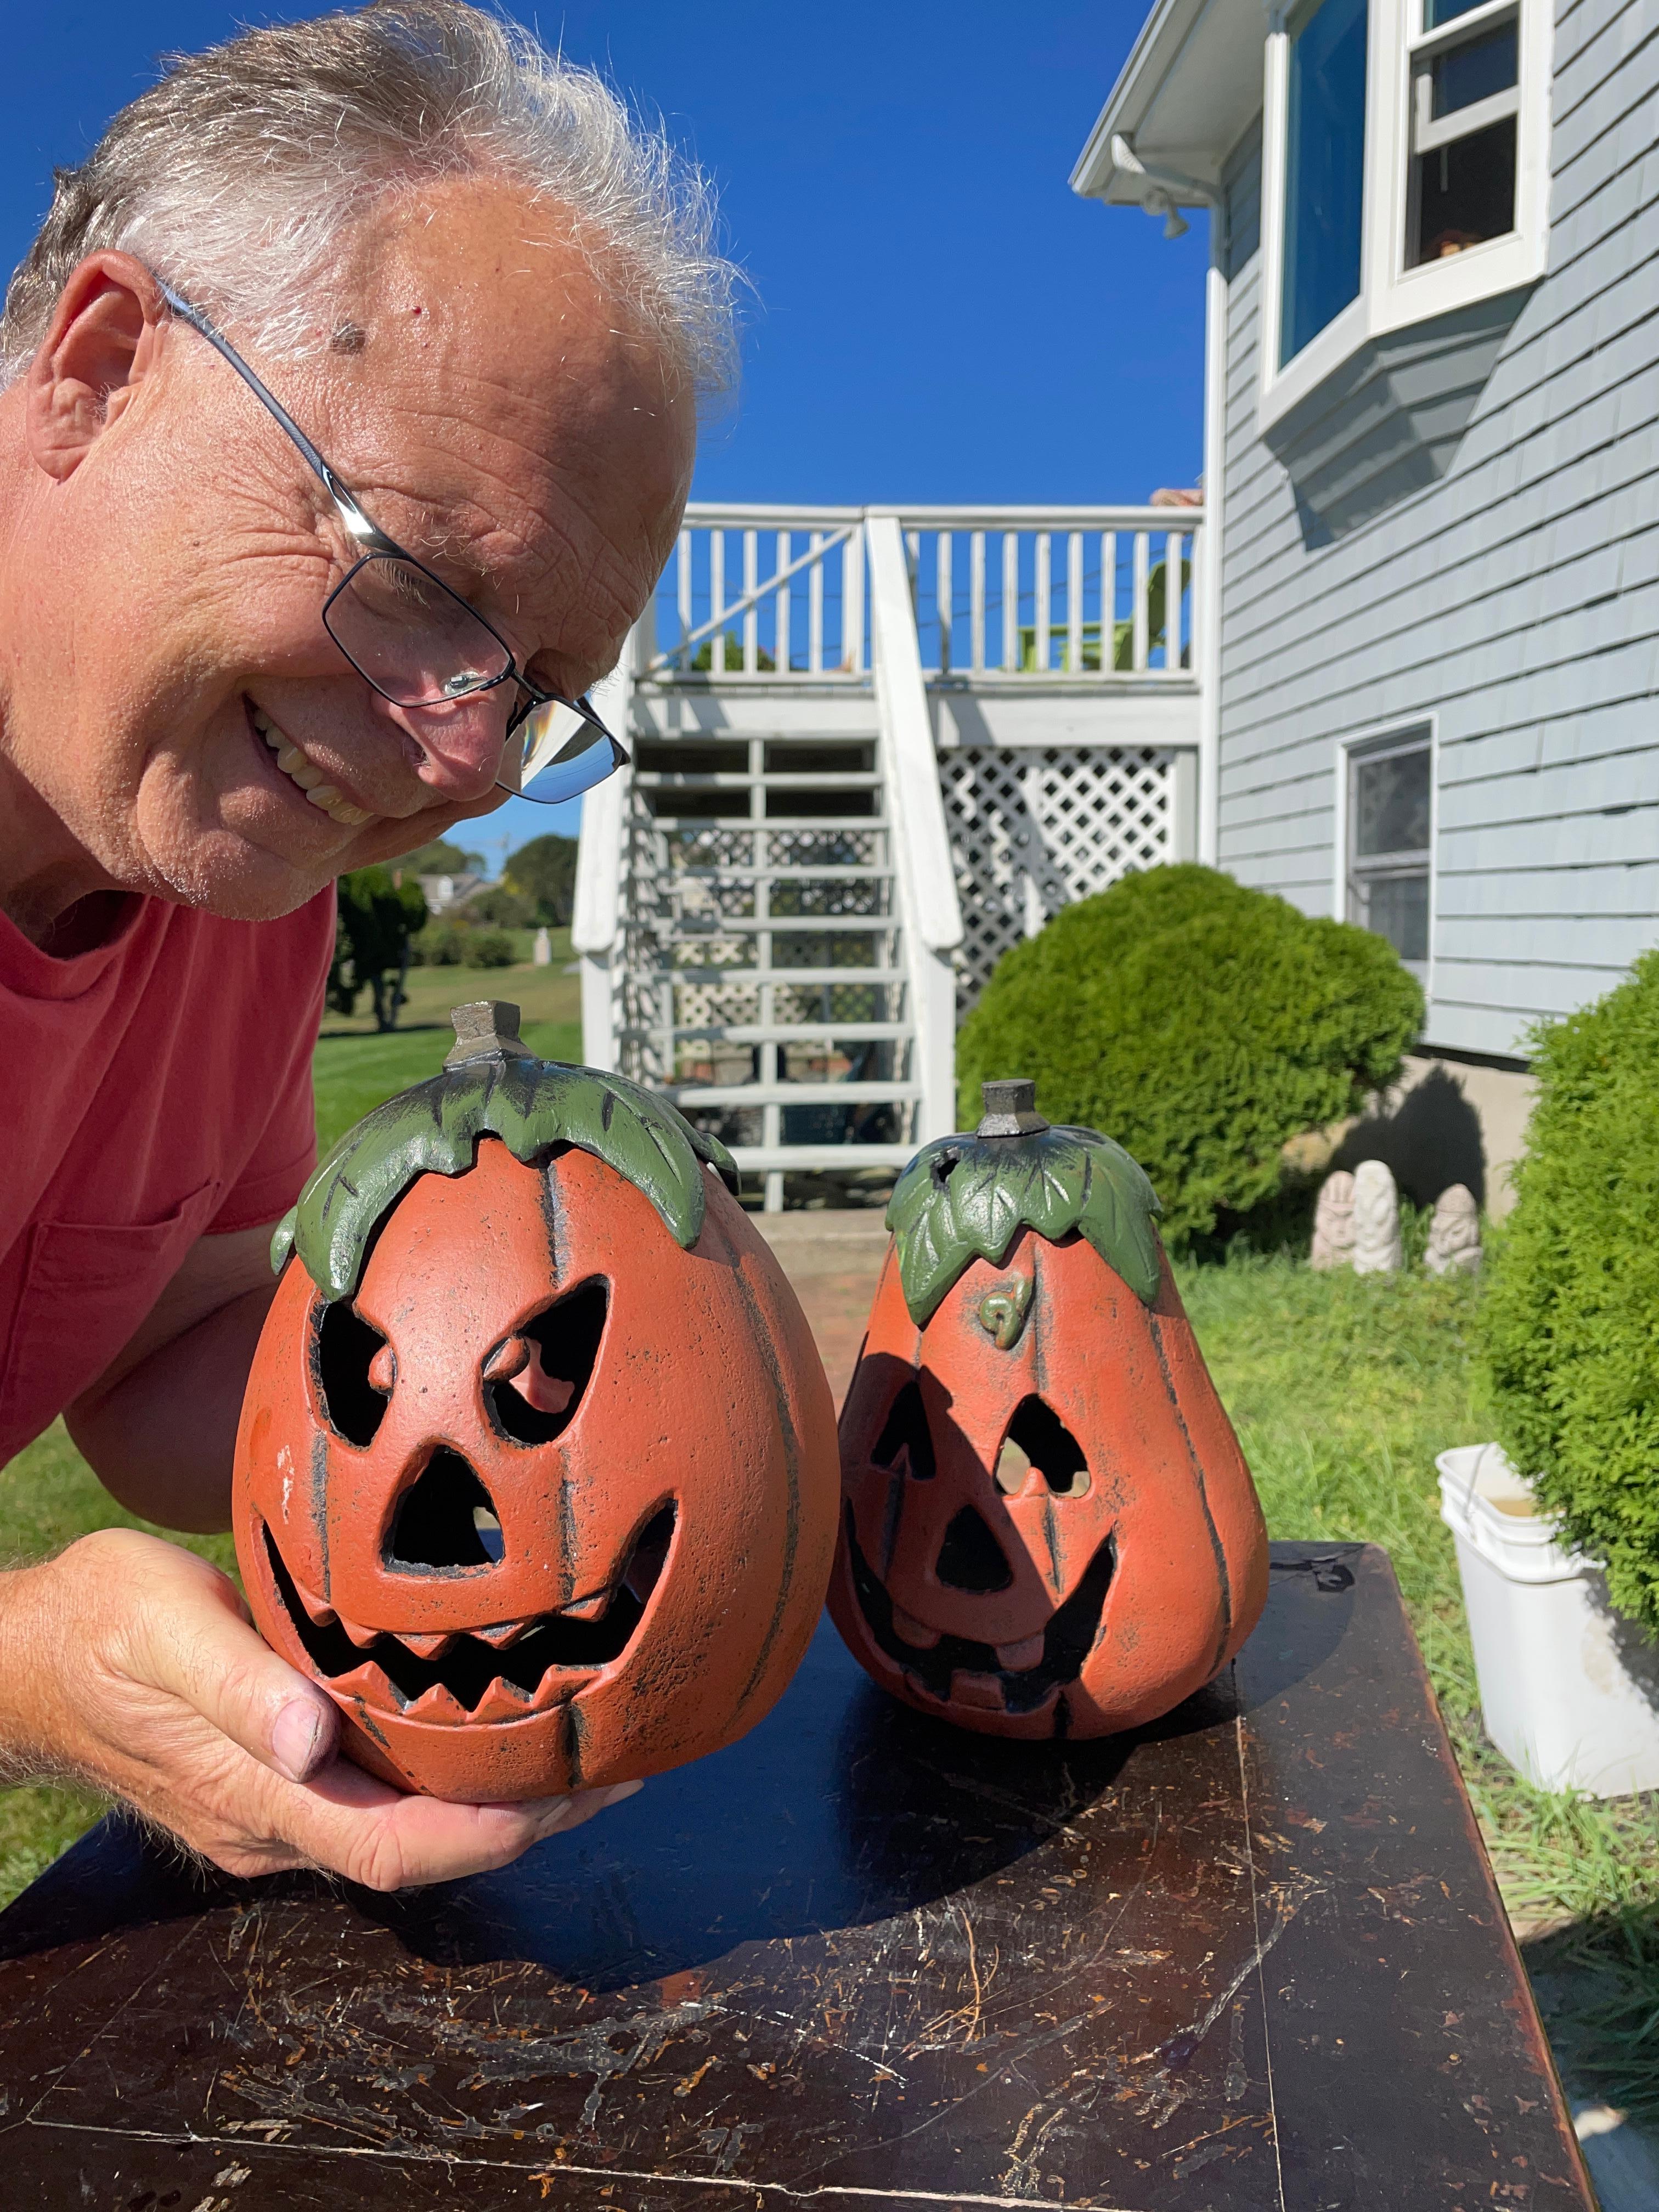 From our recent garden acquisitions- a happy pair with original box 

Japan, this handsome pair (2) of quality vintage iron halloween happy Jack-O-Lanterns with their friendly bi-faced designs and separate greenery toppers, (two charming faces on